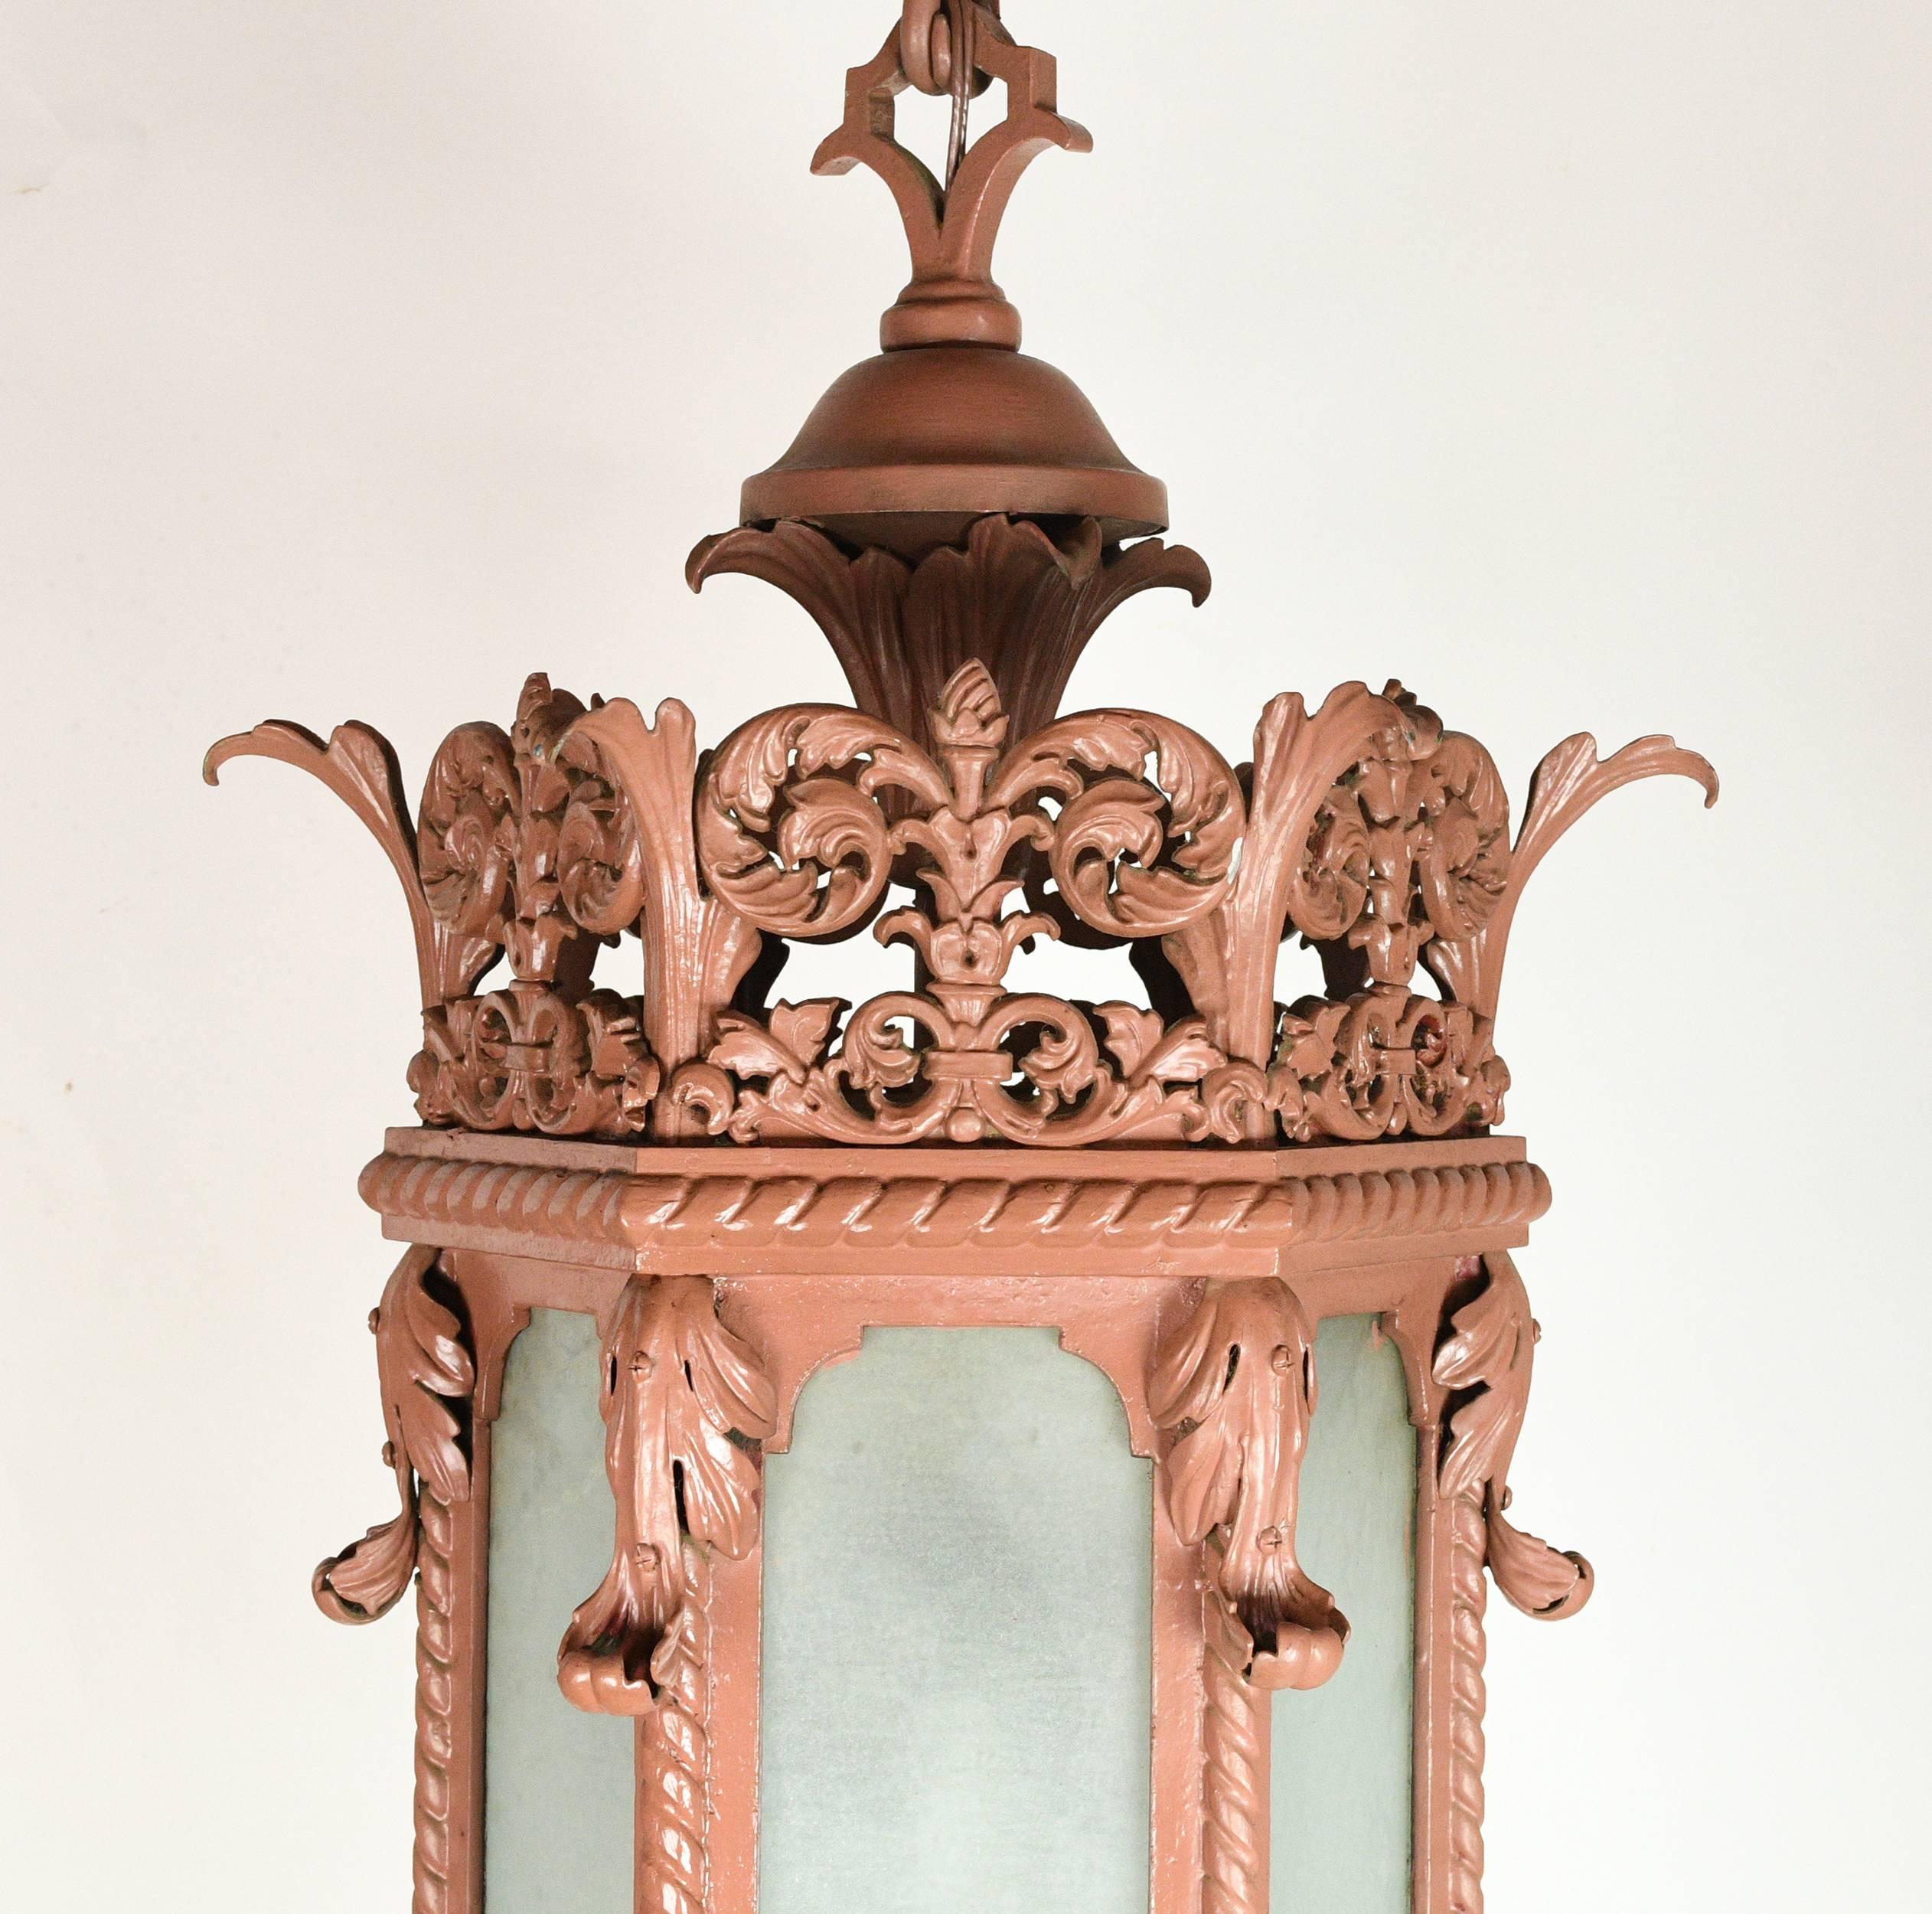 This stunning brass and iron theater pendant was originally housed at Northrop Auditorium on Minneapolis' University of Minnesota campus. Textured blue-green glass compliments the blush red finish of the fixture, while floral filigree details add